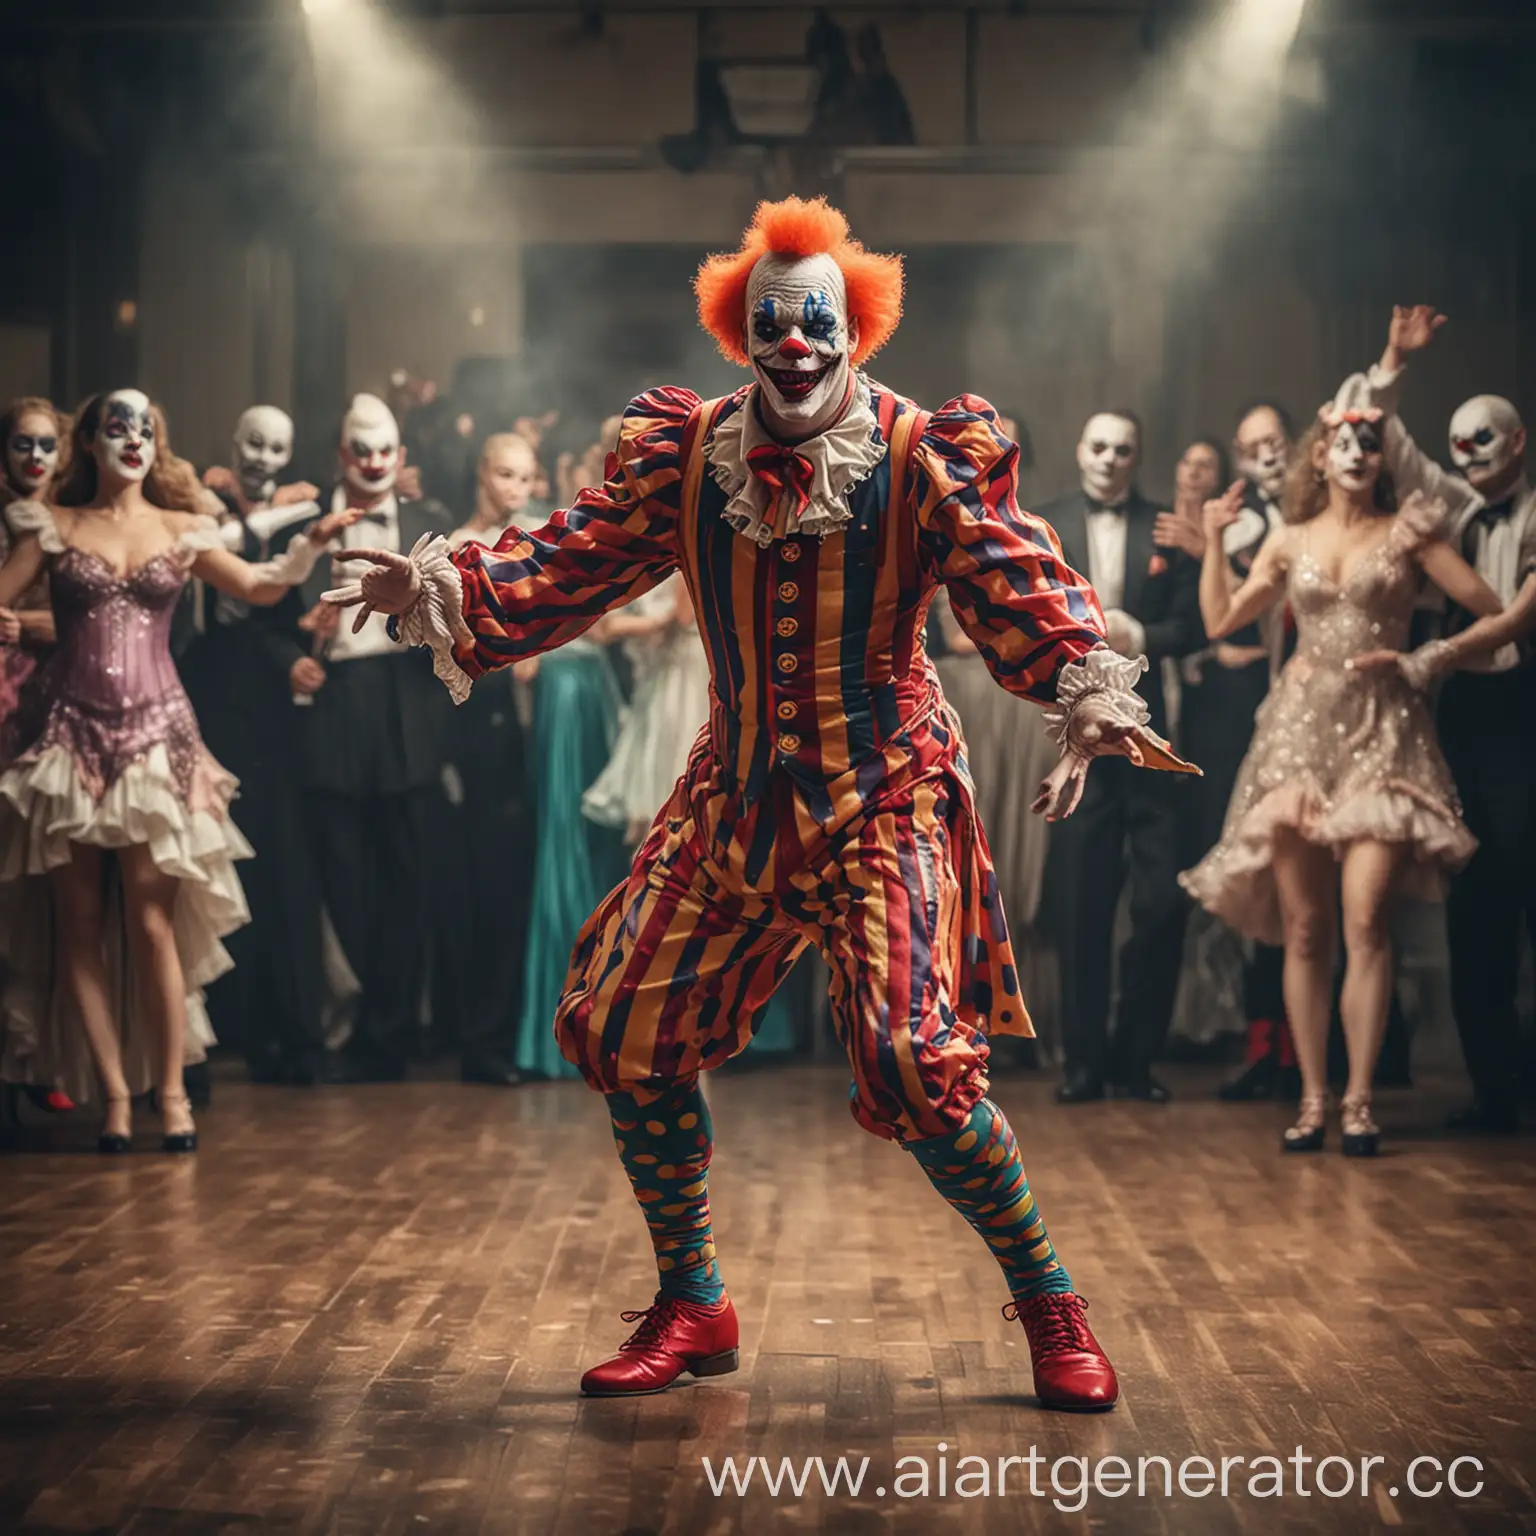 Sinister-Clown-Dancing-Elegantly-at-Ballroom-Competition